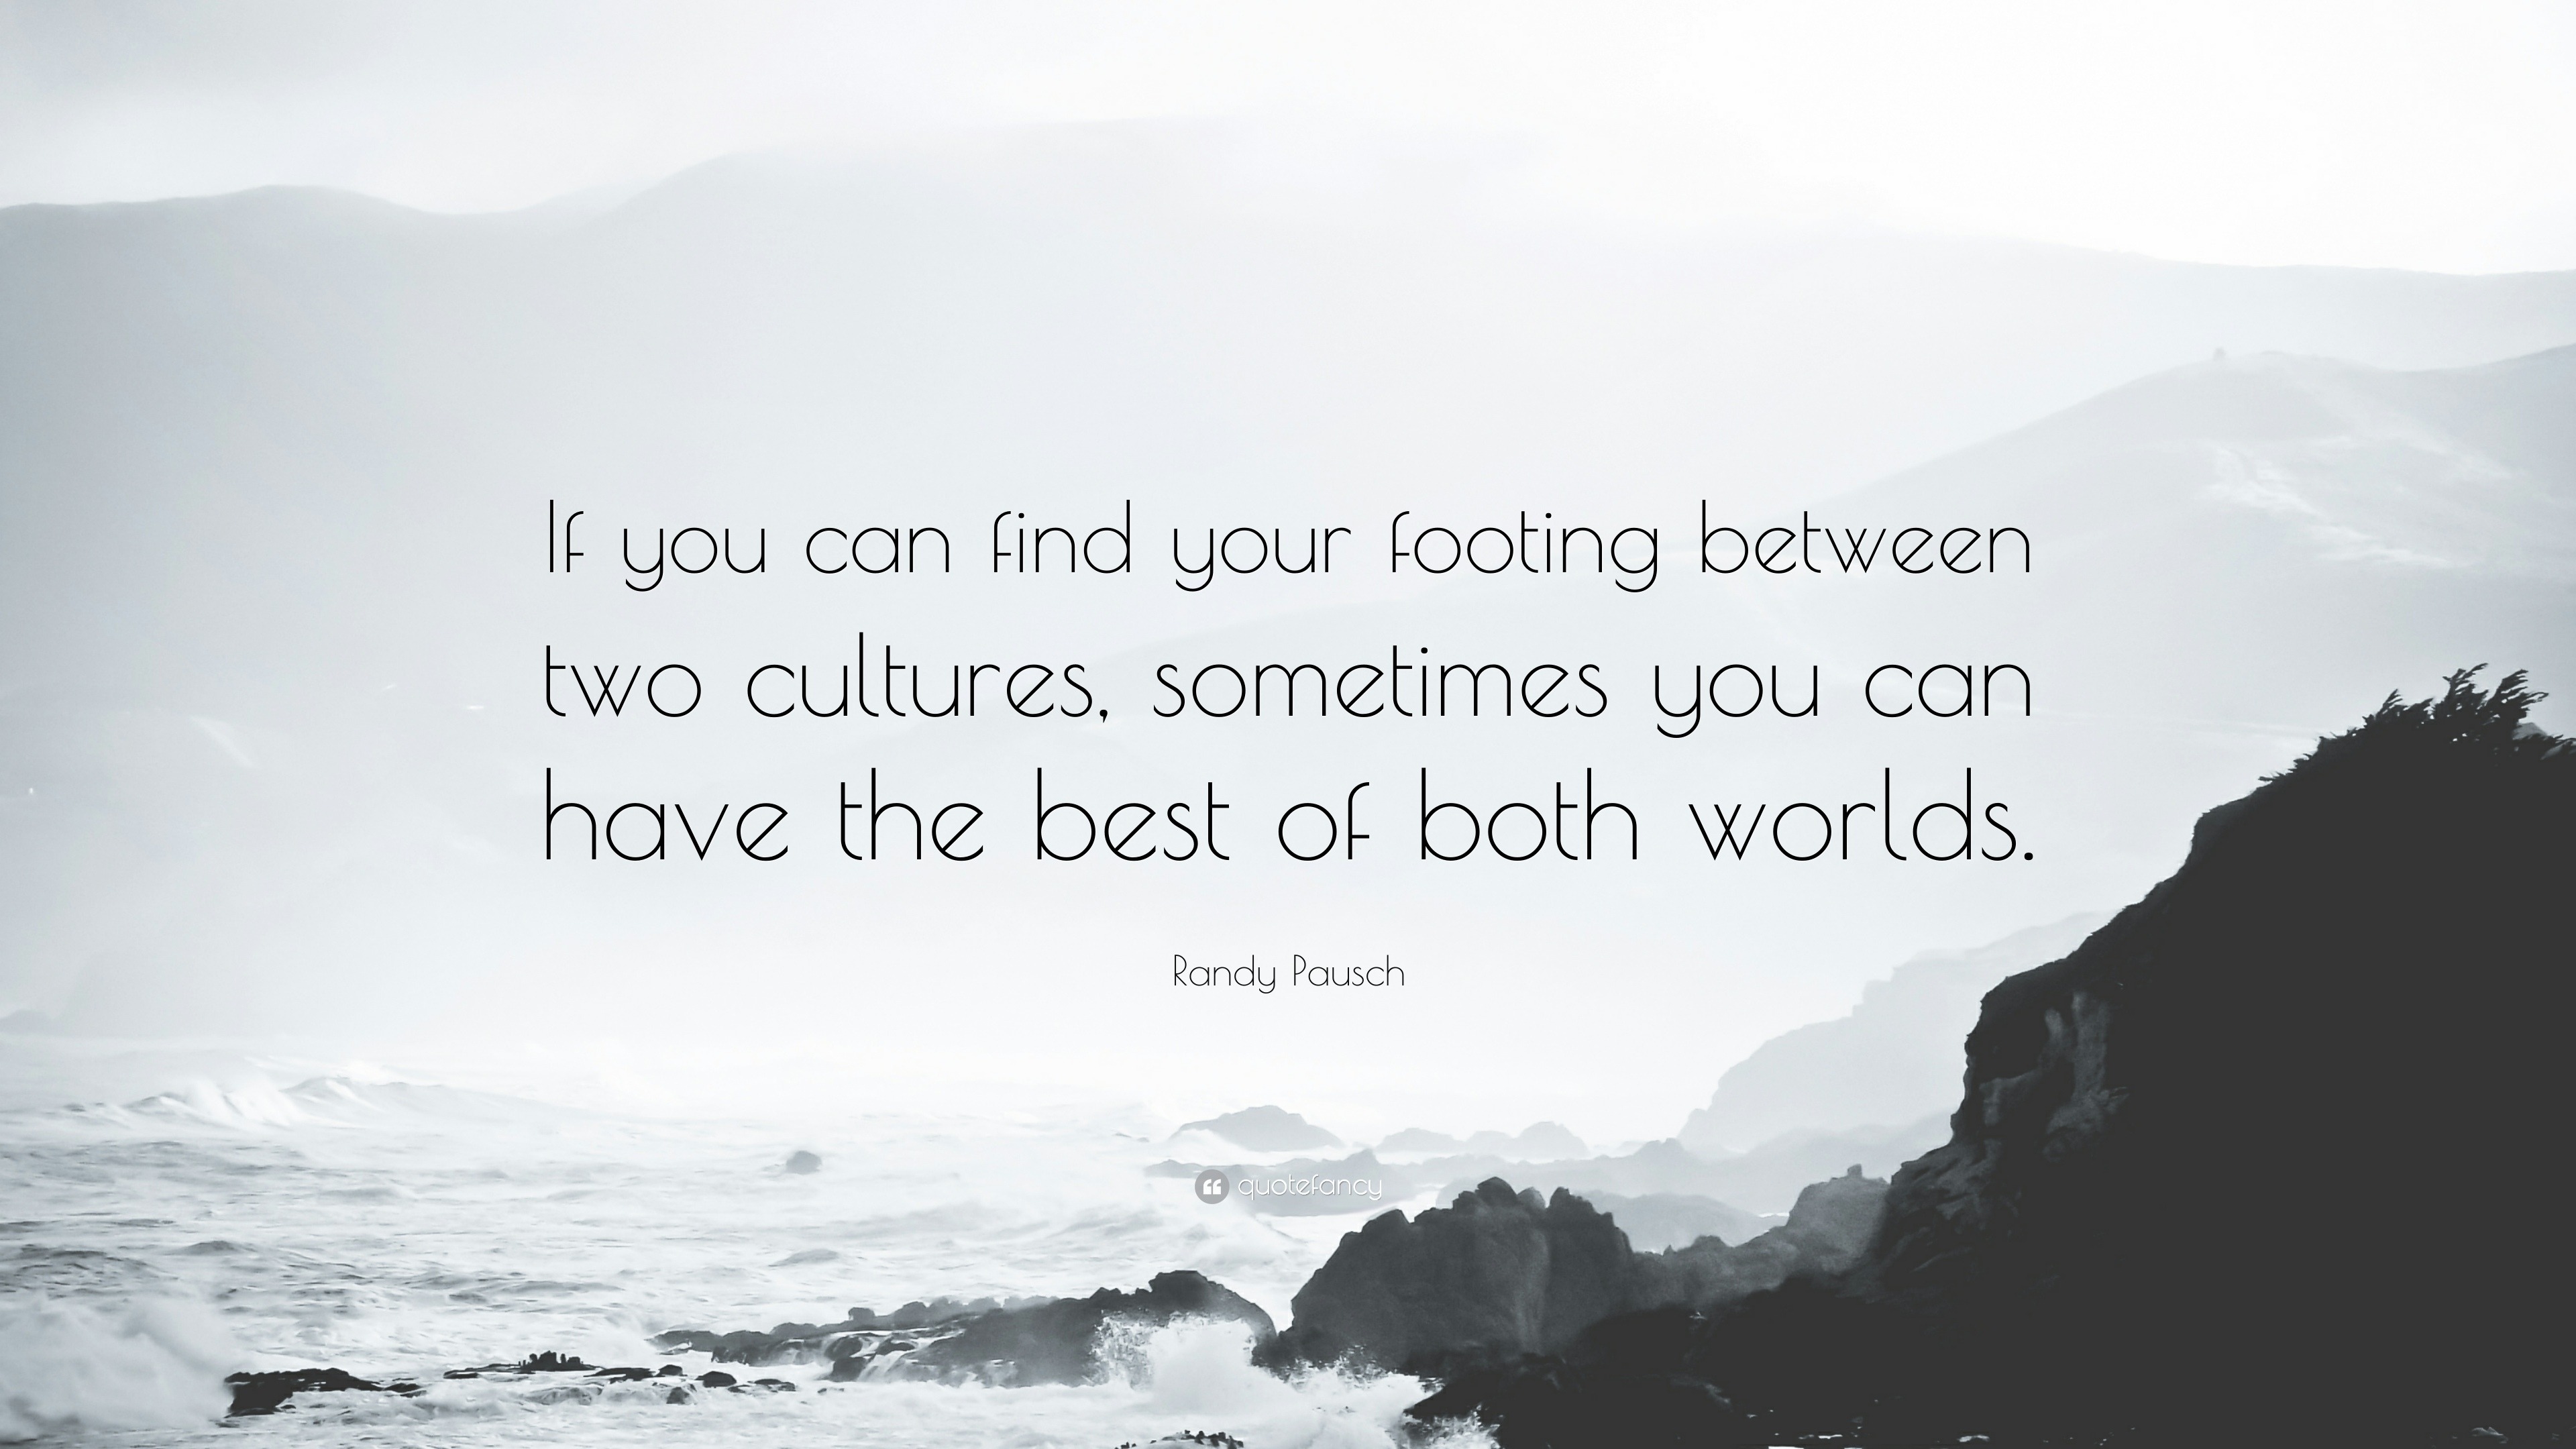 Randy Pausch Quote: “If You Can Find Your Footing Between Two Cultures, Sometimes You Can Have